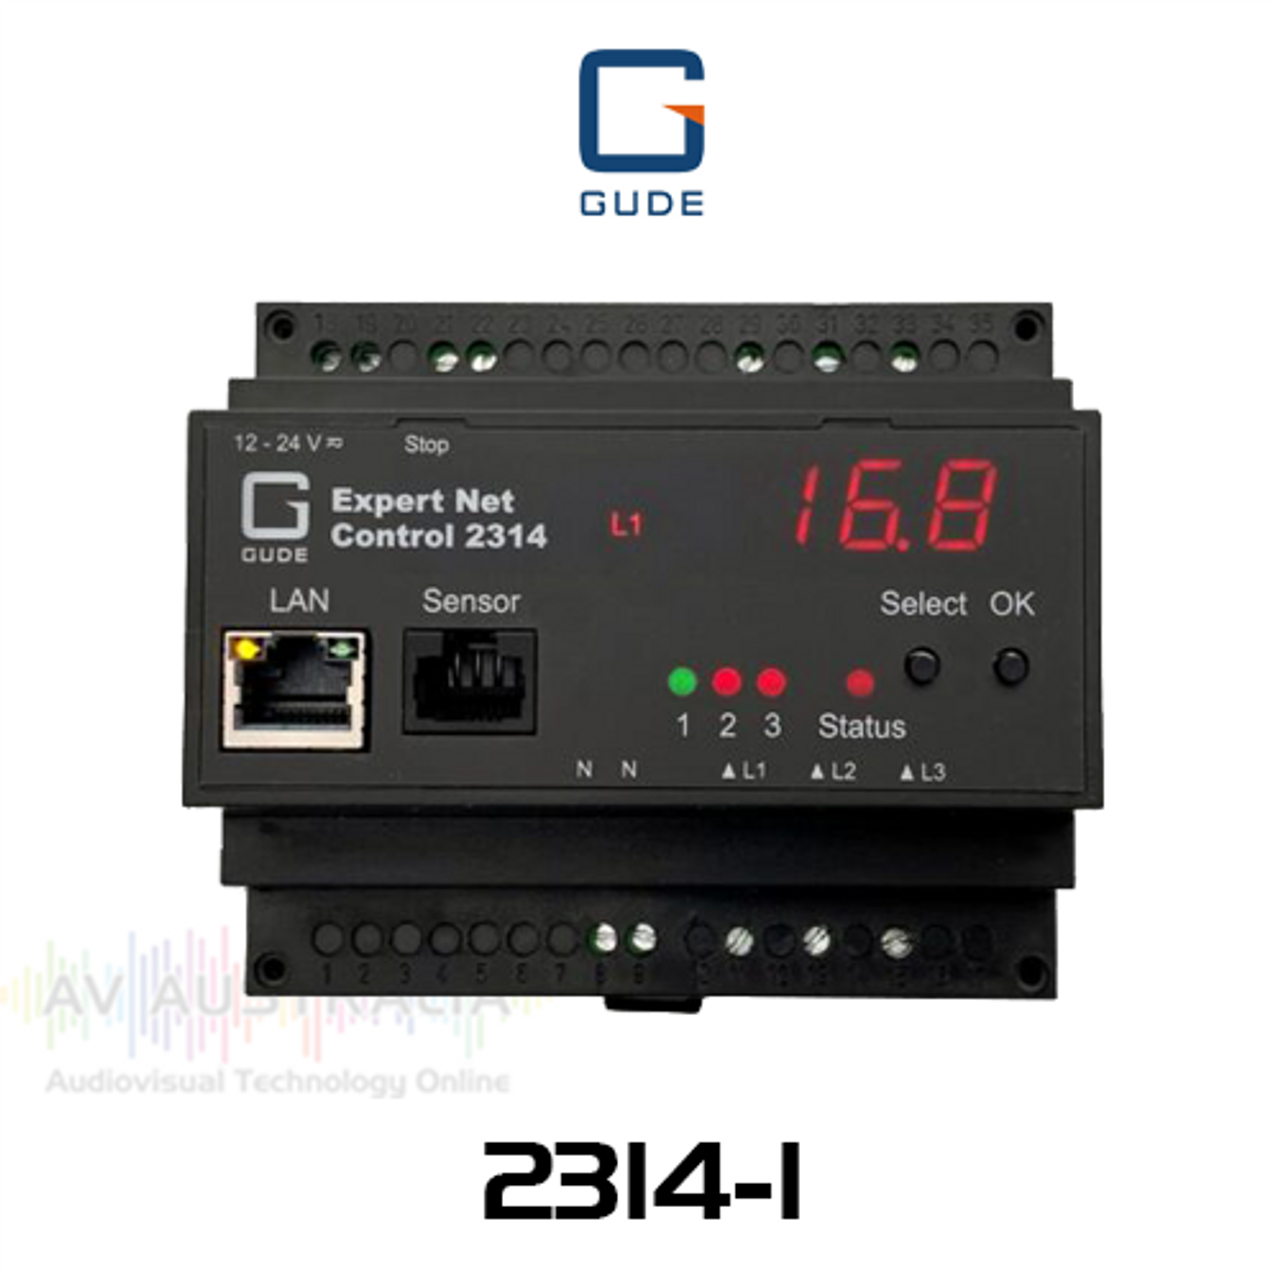 GUDE DIN-Rail Remote Rack Monitoring System with 3 Switchable Relay Outputs